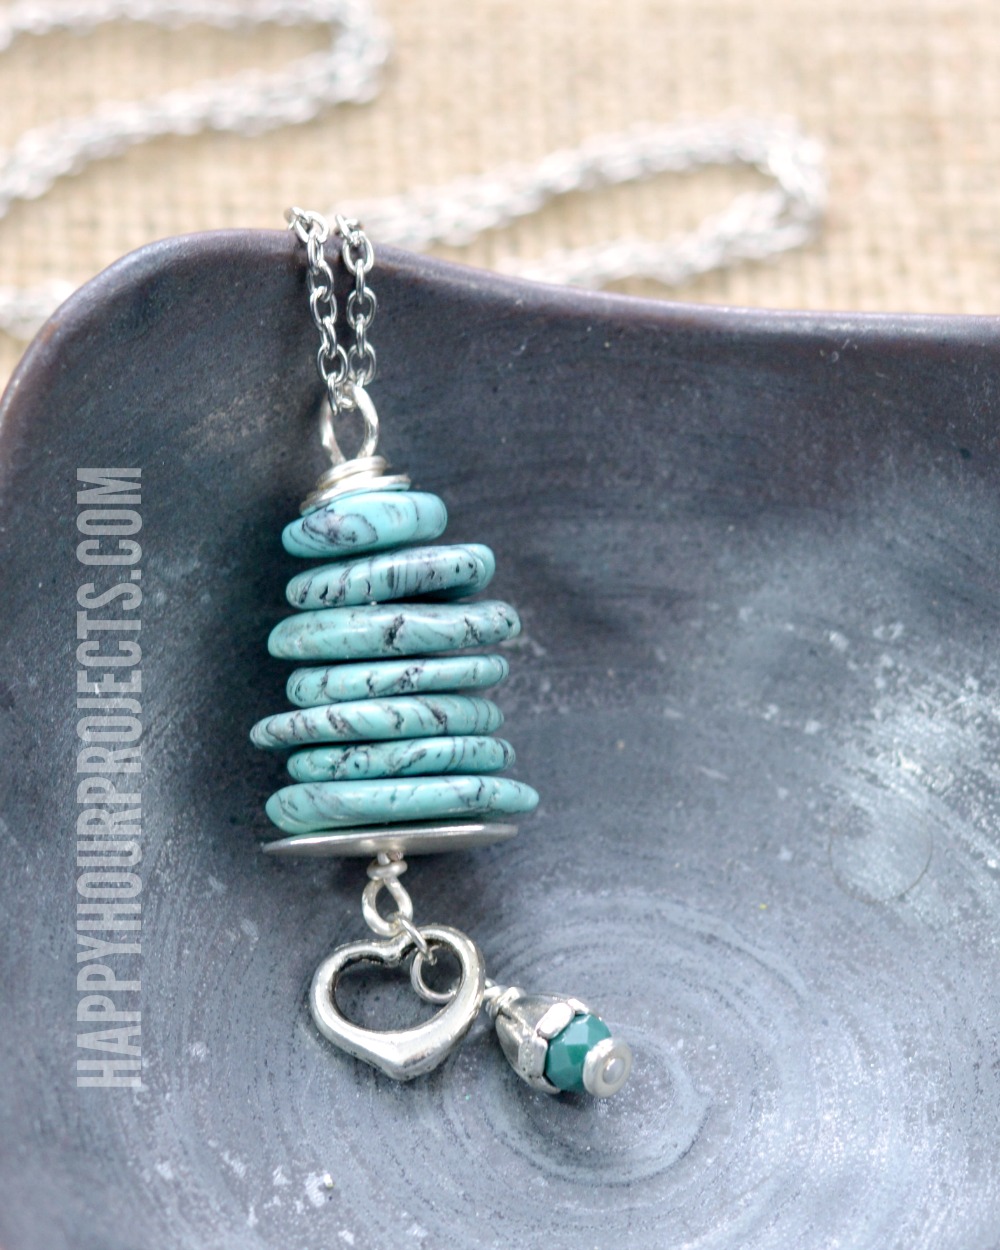 Stacked Stone + Pewter Pendant at happyhourprojects.com